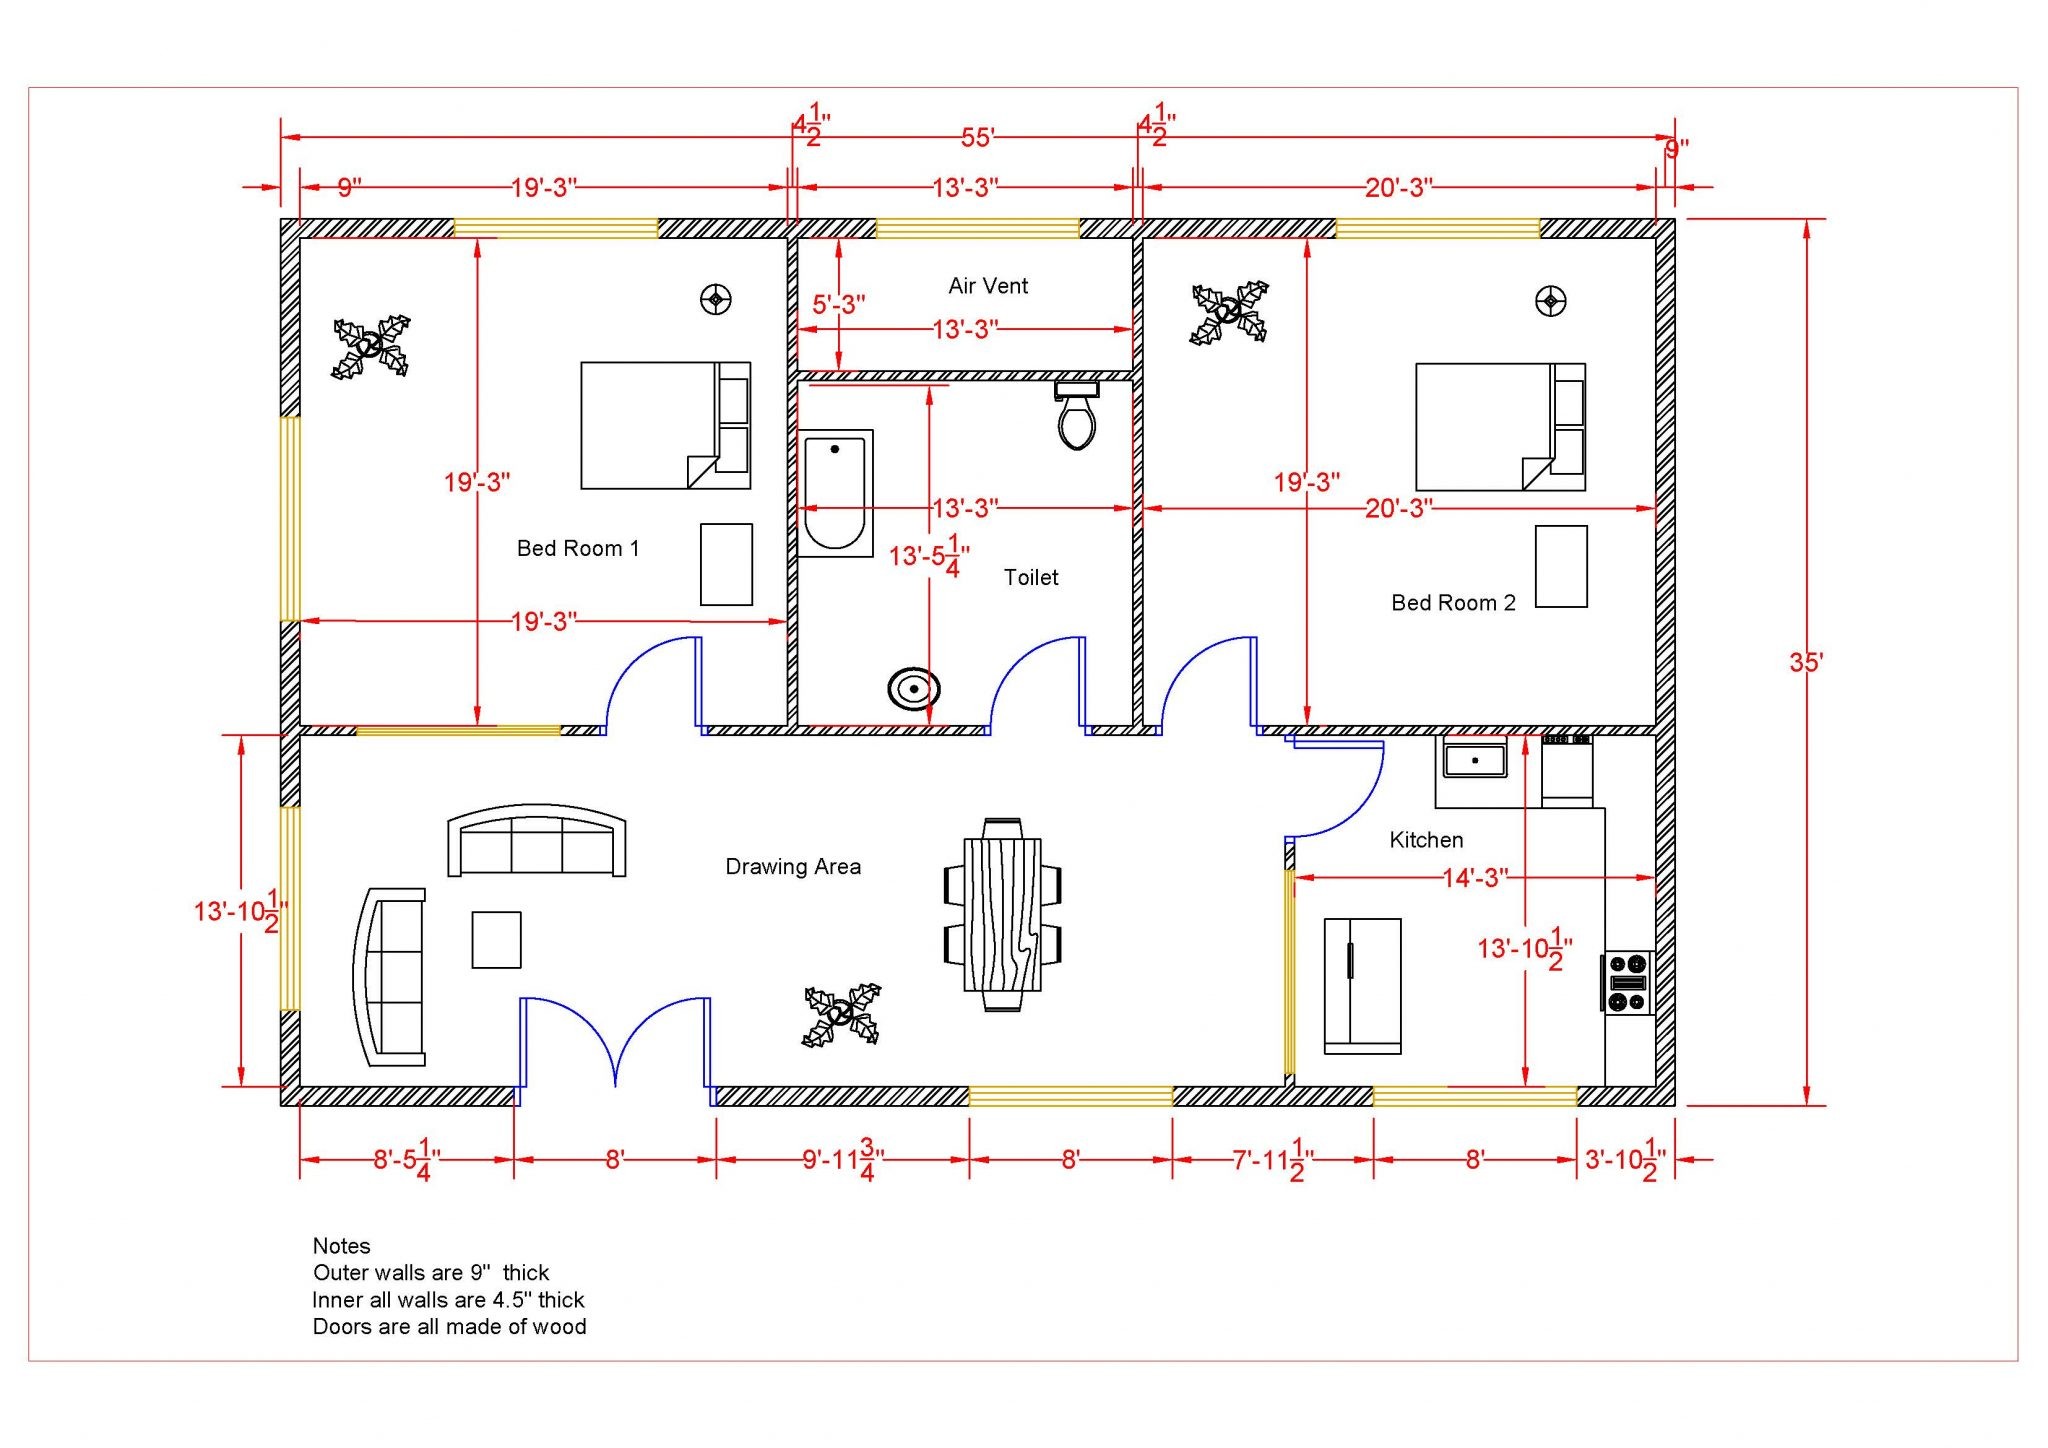 How to make House Floor Plan in AutoCAD Learn